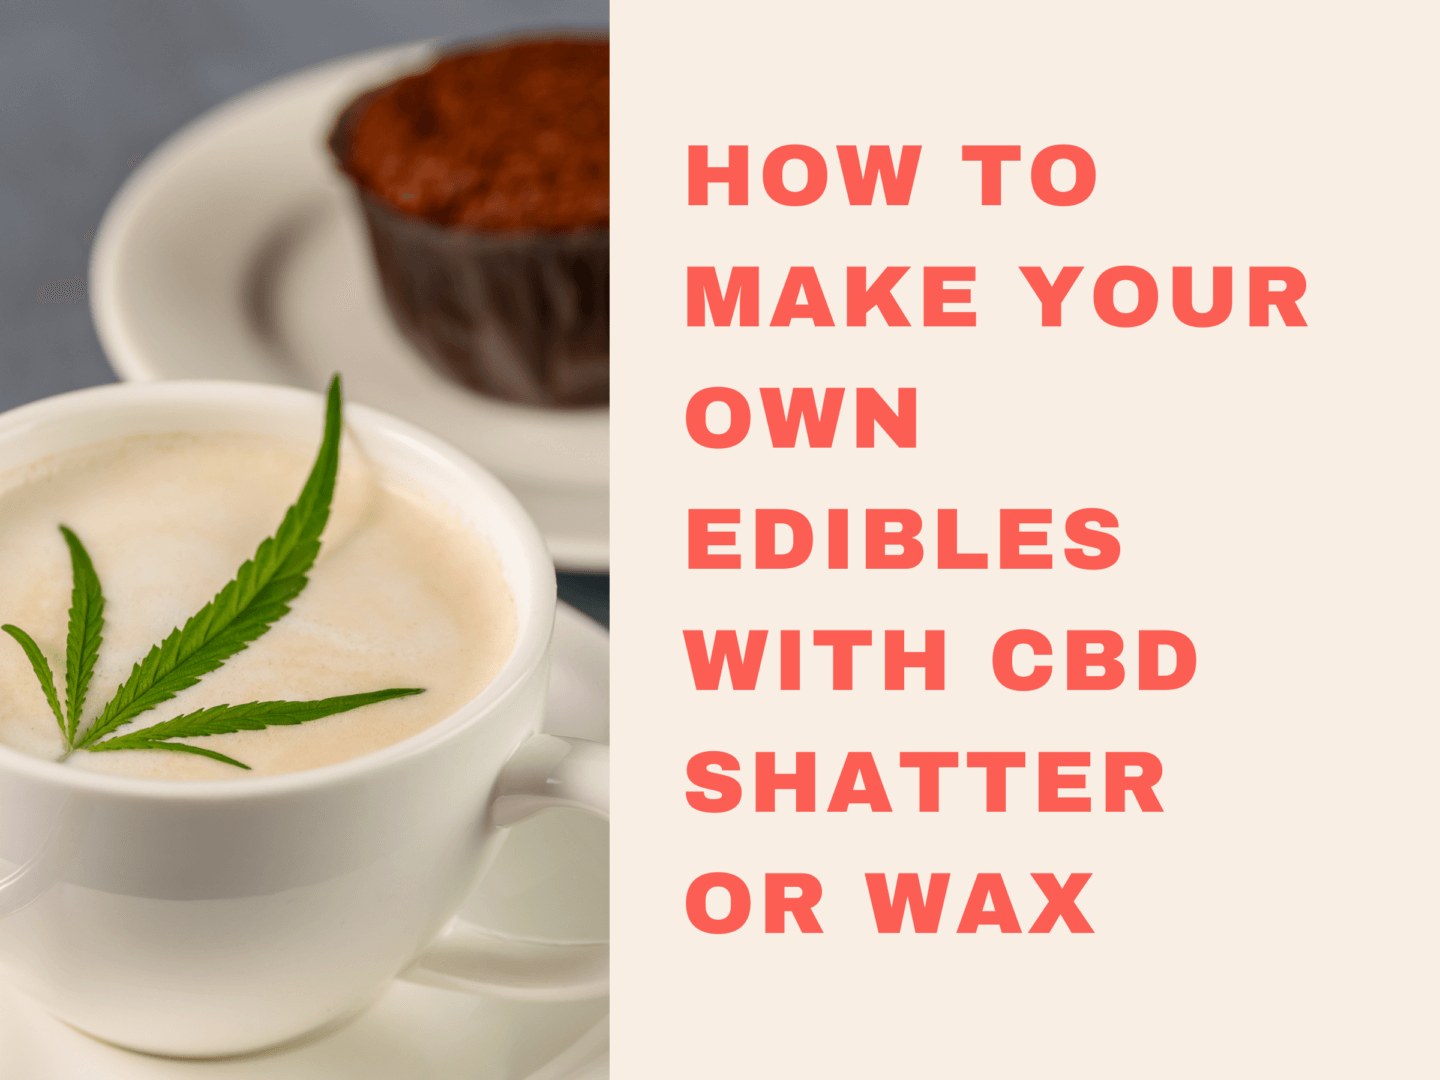 HOW TO MAKE YOUR OWN EDIBLES WITH CBD SHATTER OR WAX